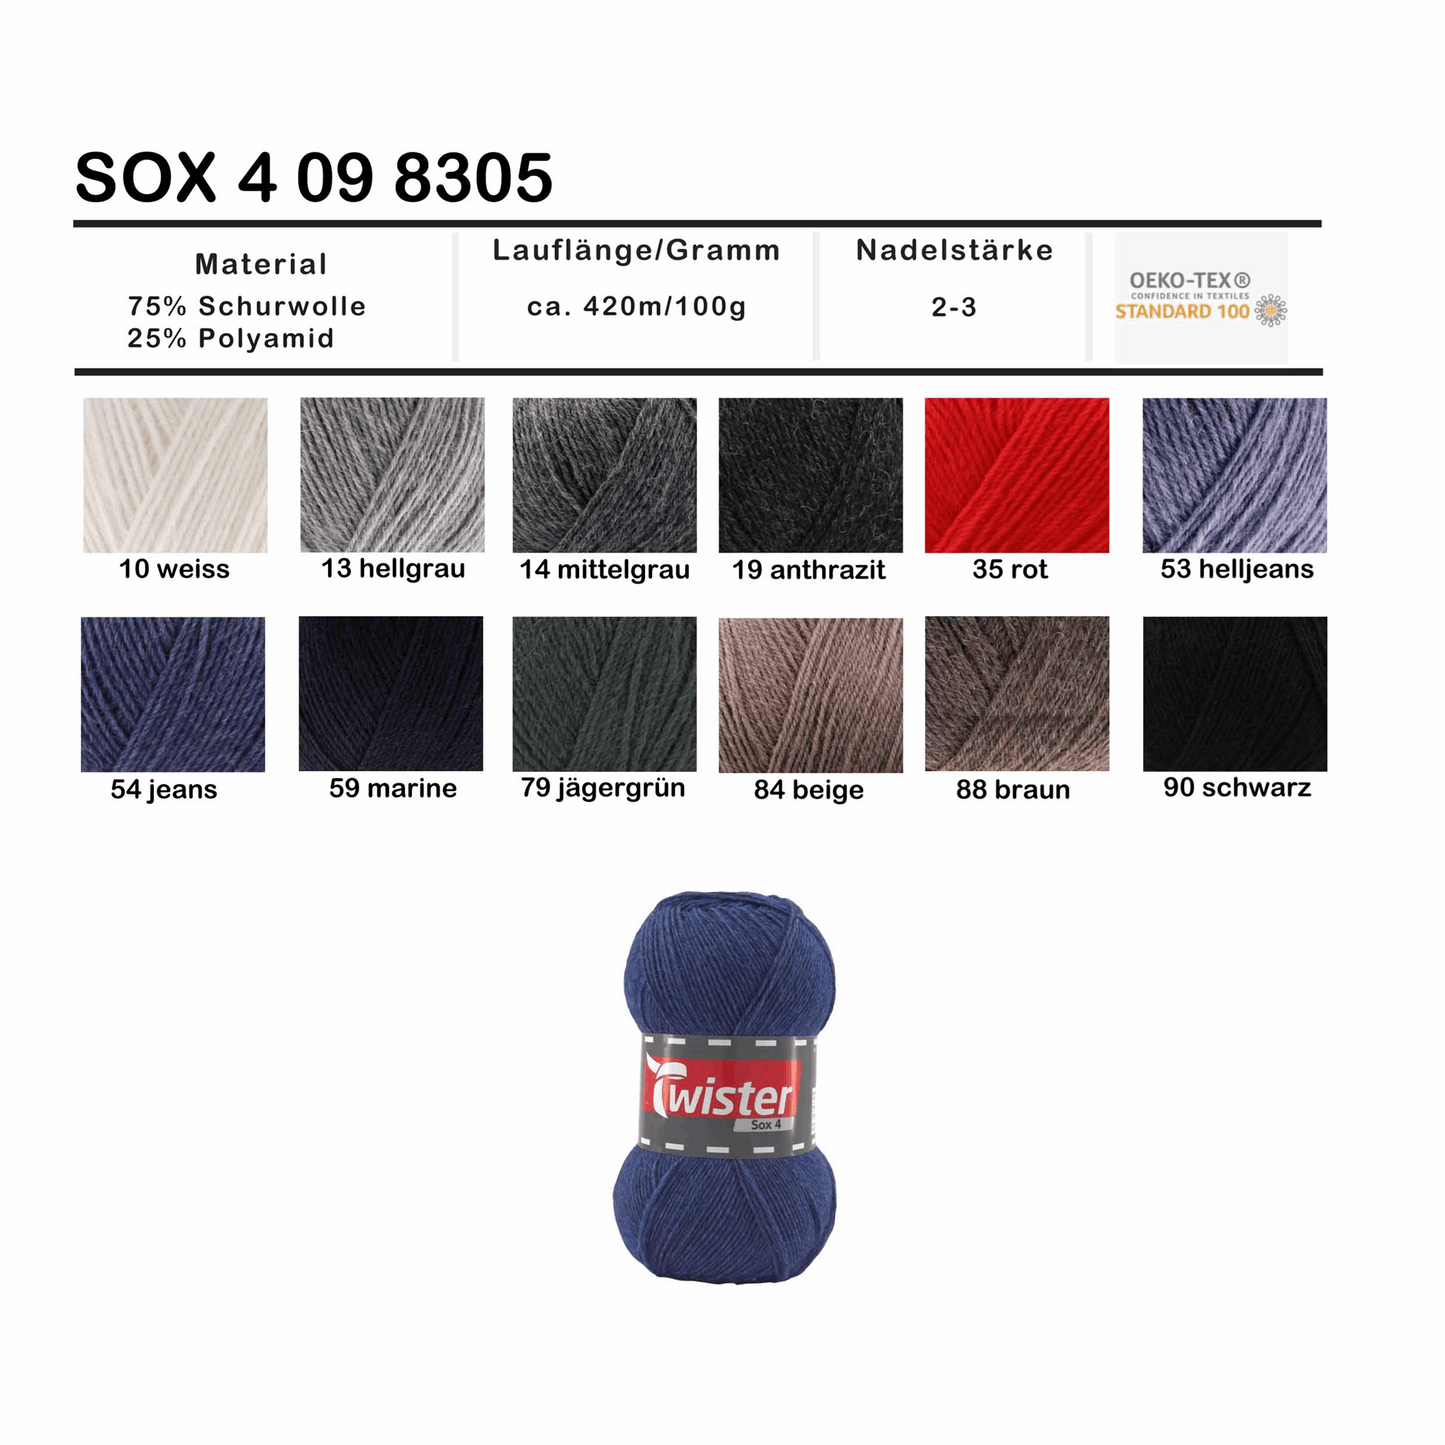 Twister Sox4, 100g, 98305, Farbe anthrazit 19